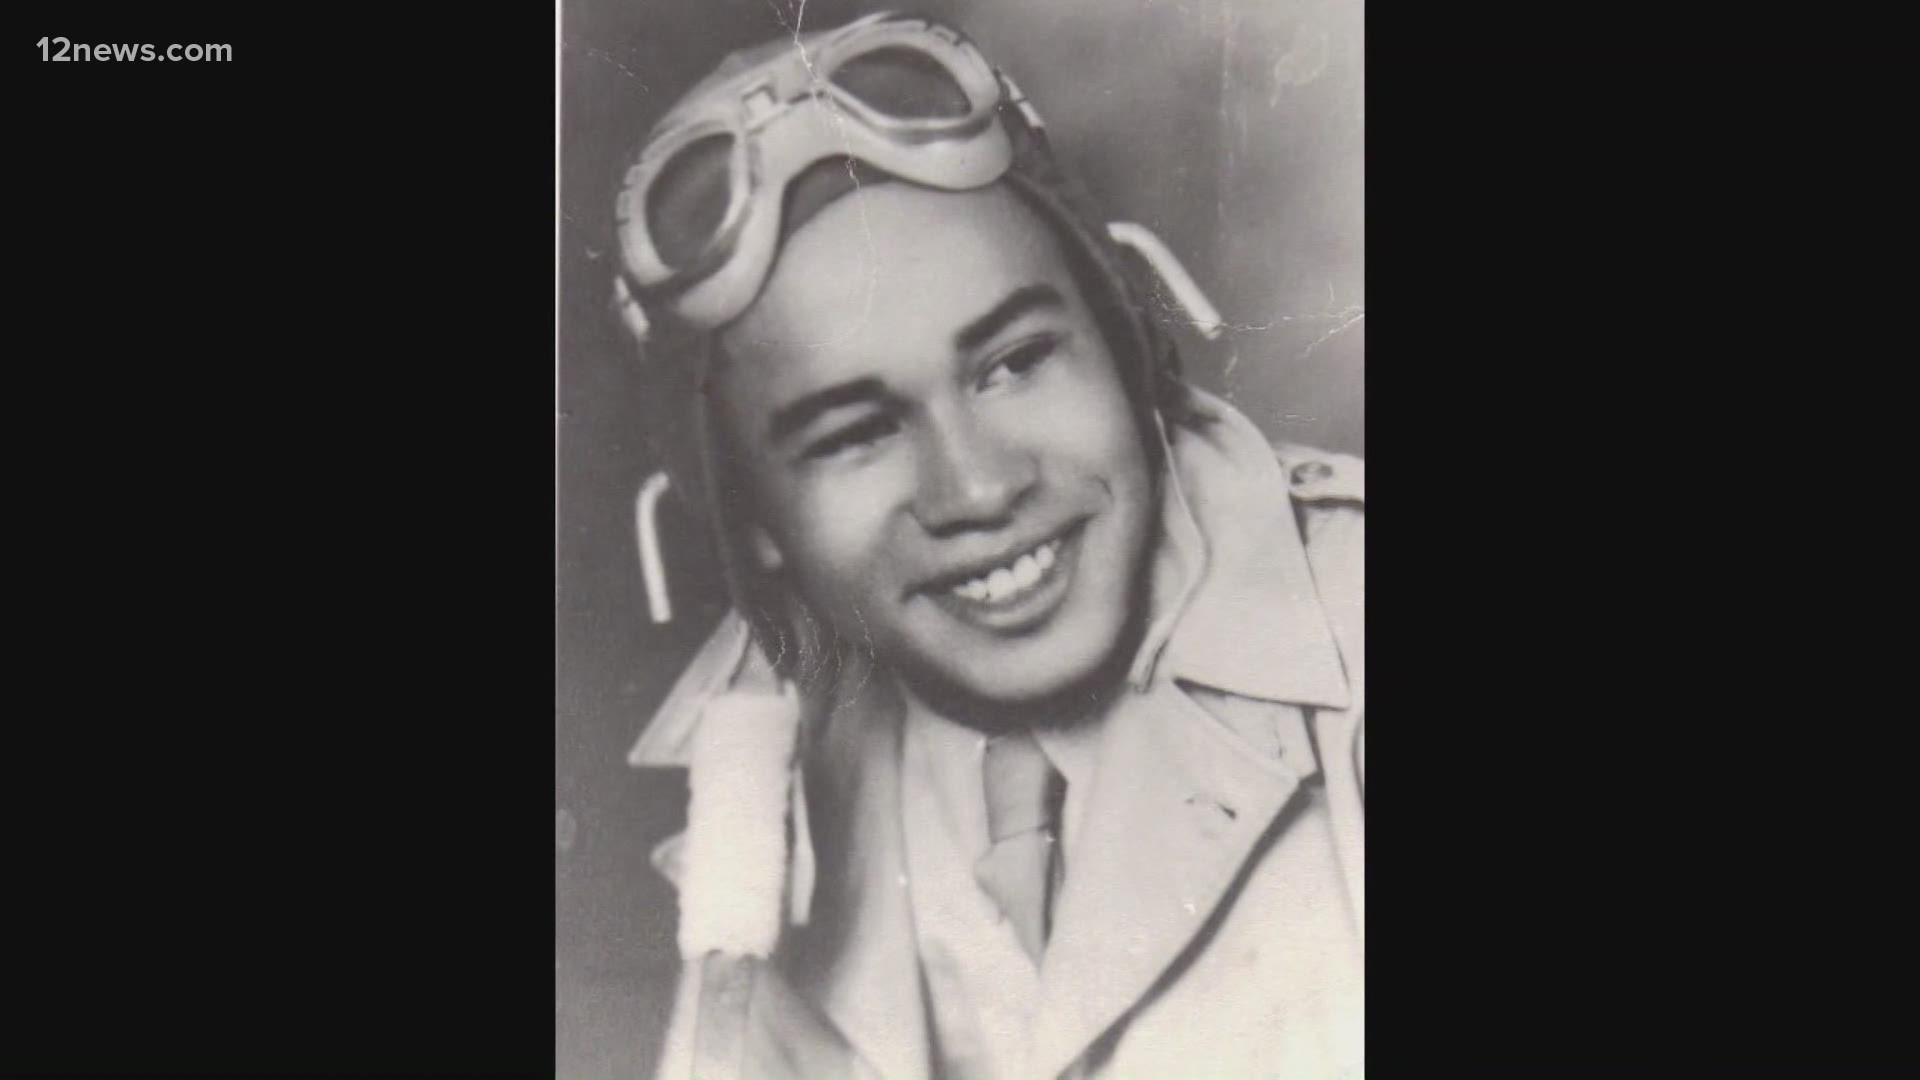 Air Force Major George Biggs will be remembered as a member of the Tuskegee Airman. He passed away at 95. His daughter gives a look back on his extraordinary life.